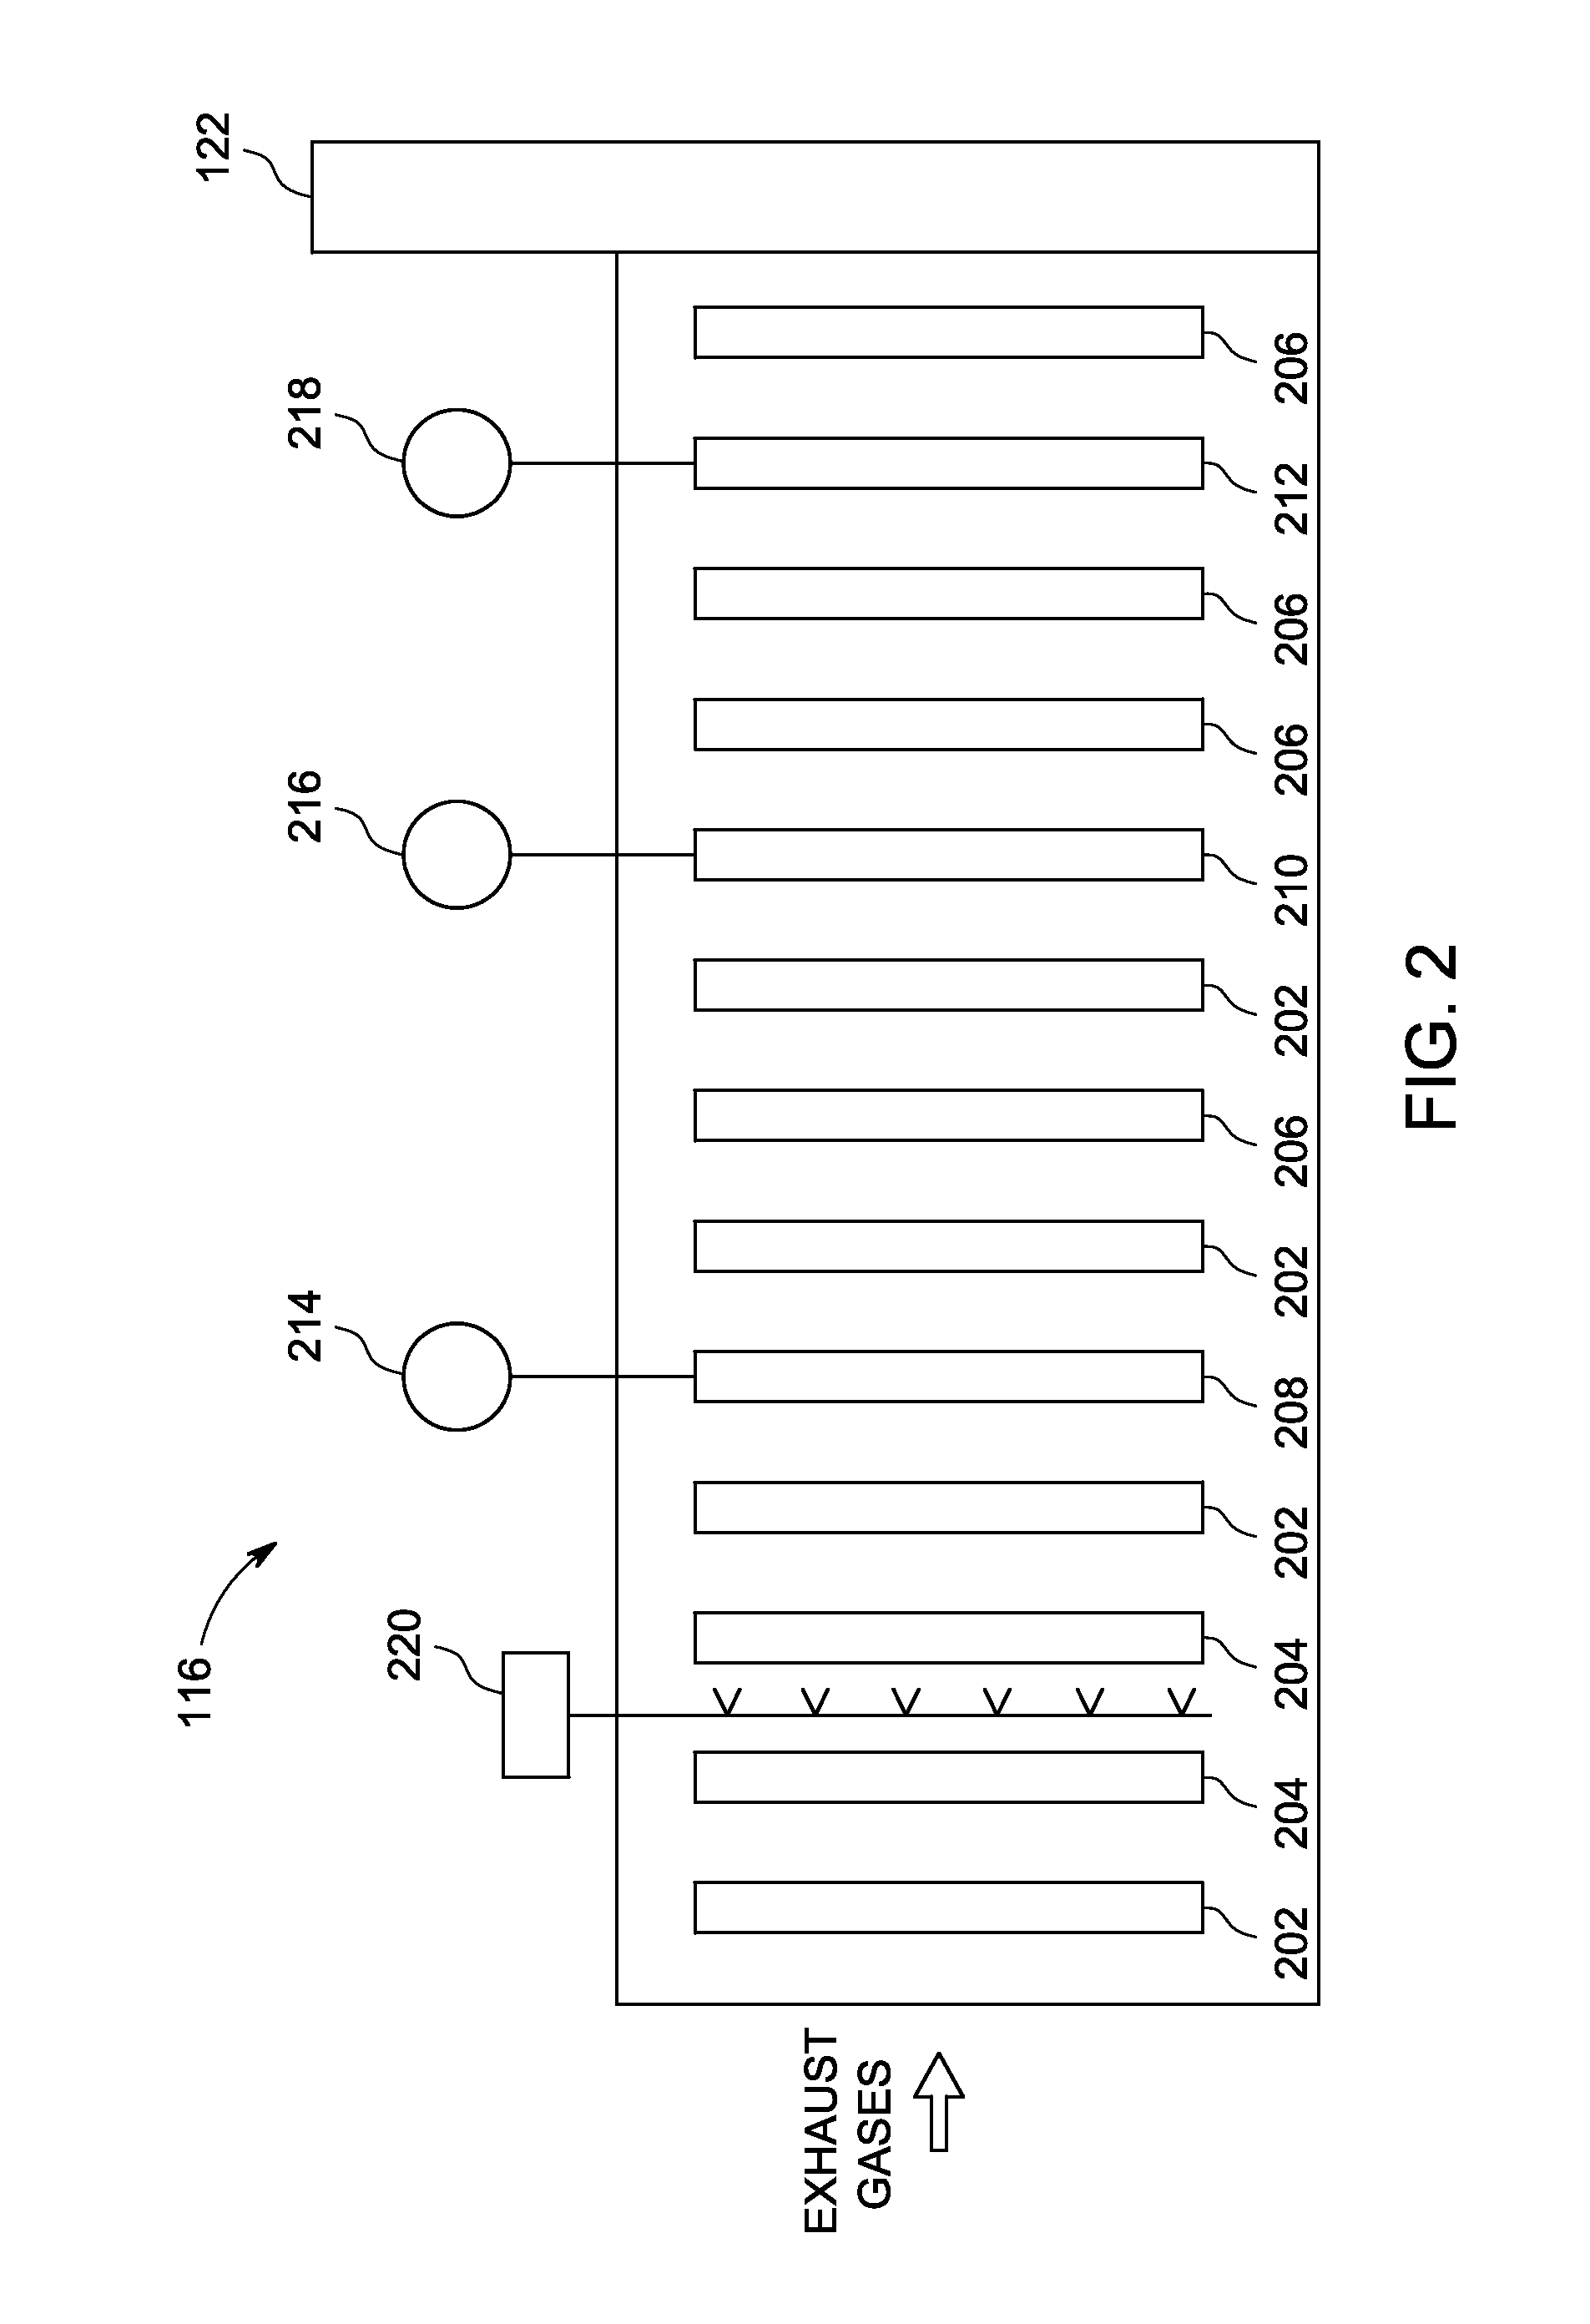 Systems, methods, and apparatus for regenerating a catalytic material